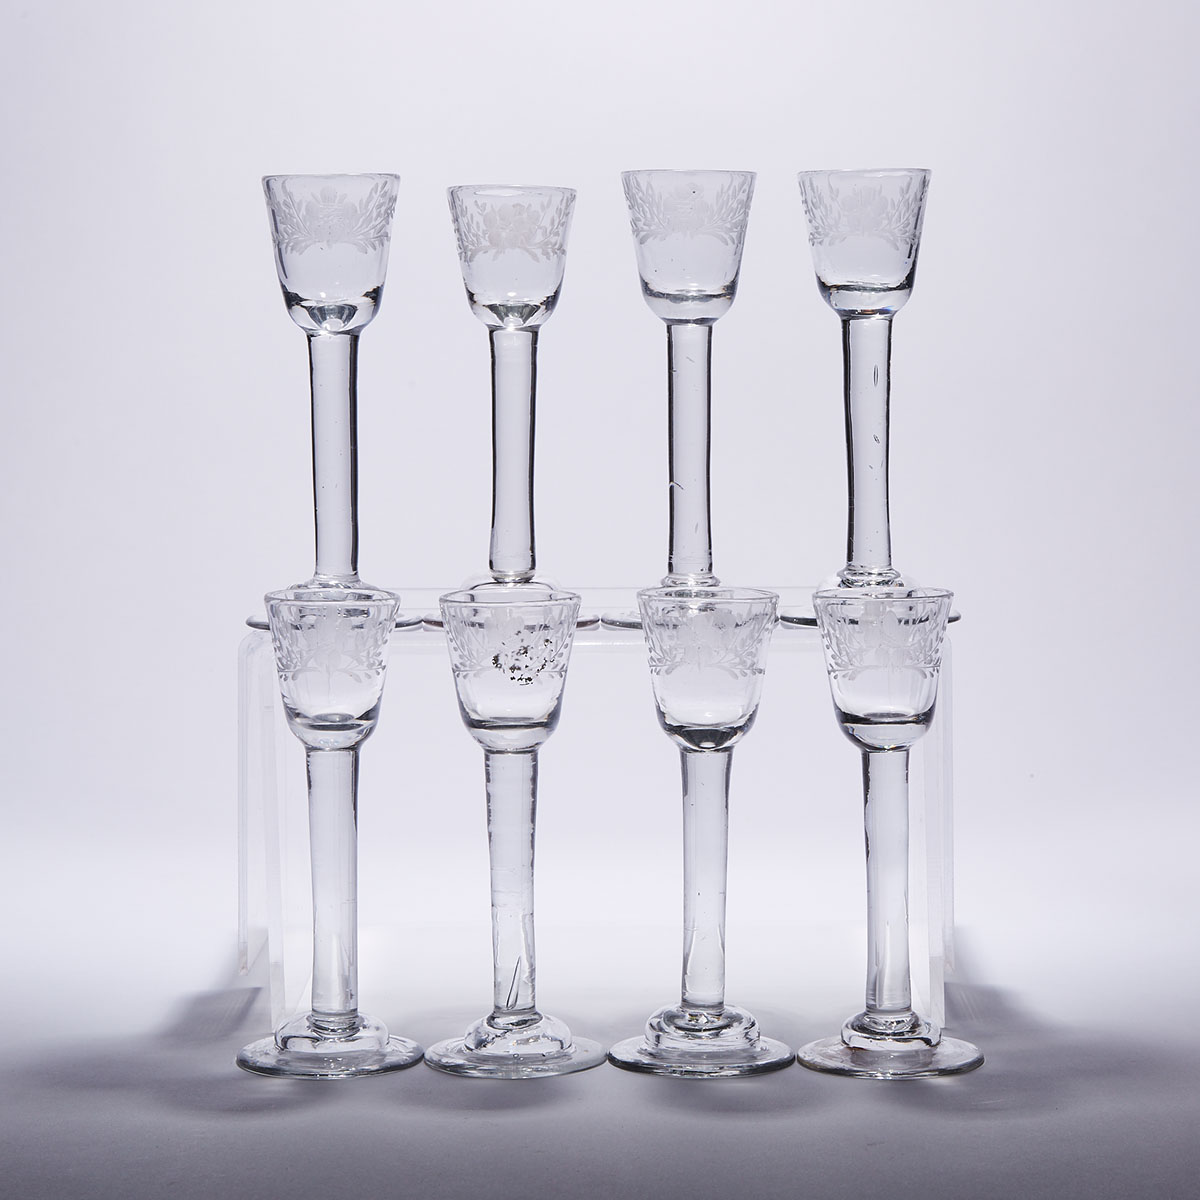 Set of Eight English Plain Stemmed Engraved Wine Glasses, mid-18th century